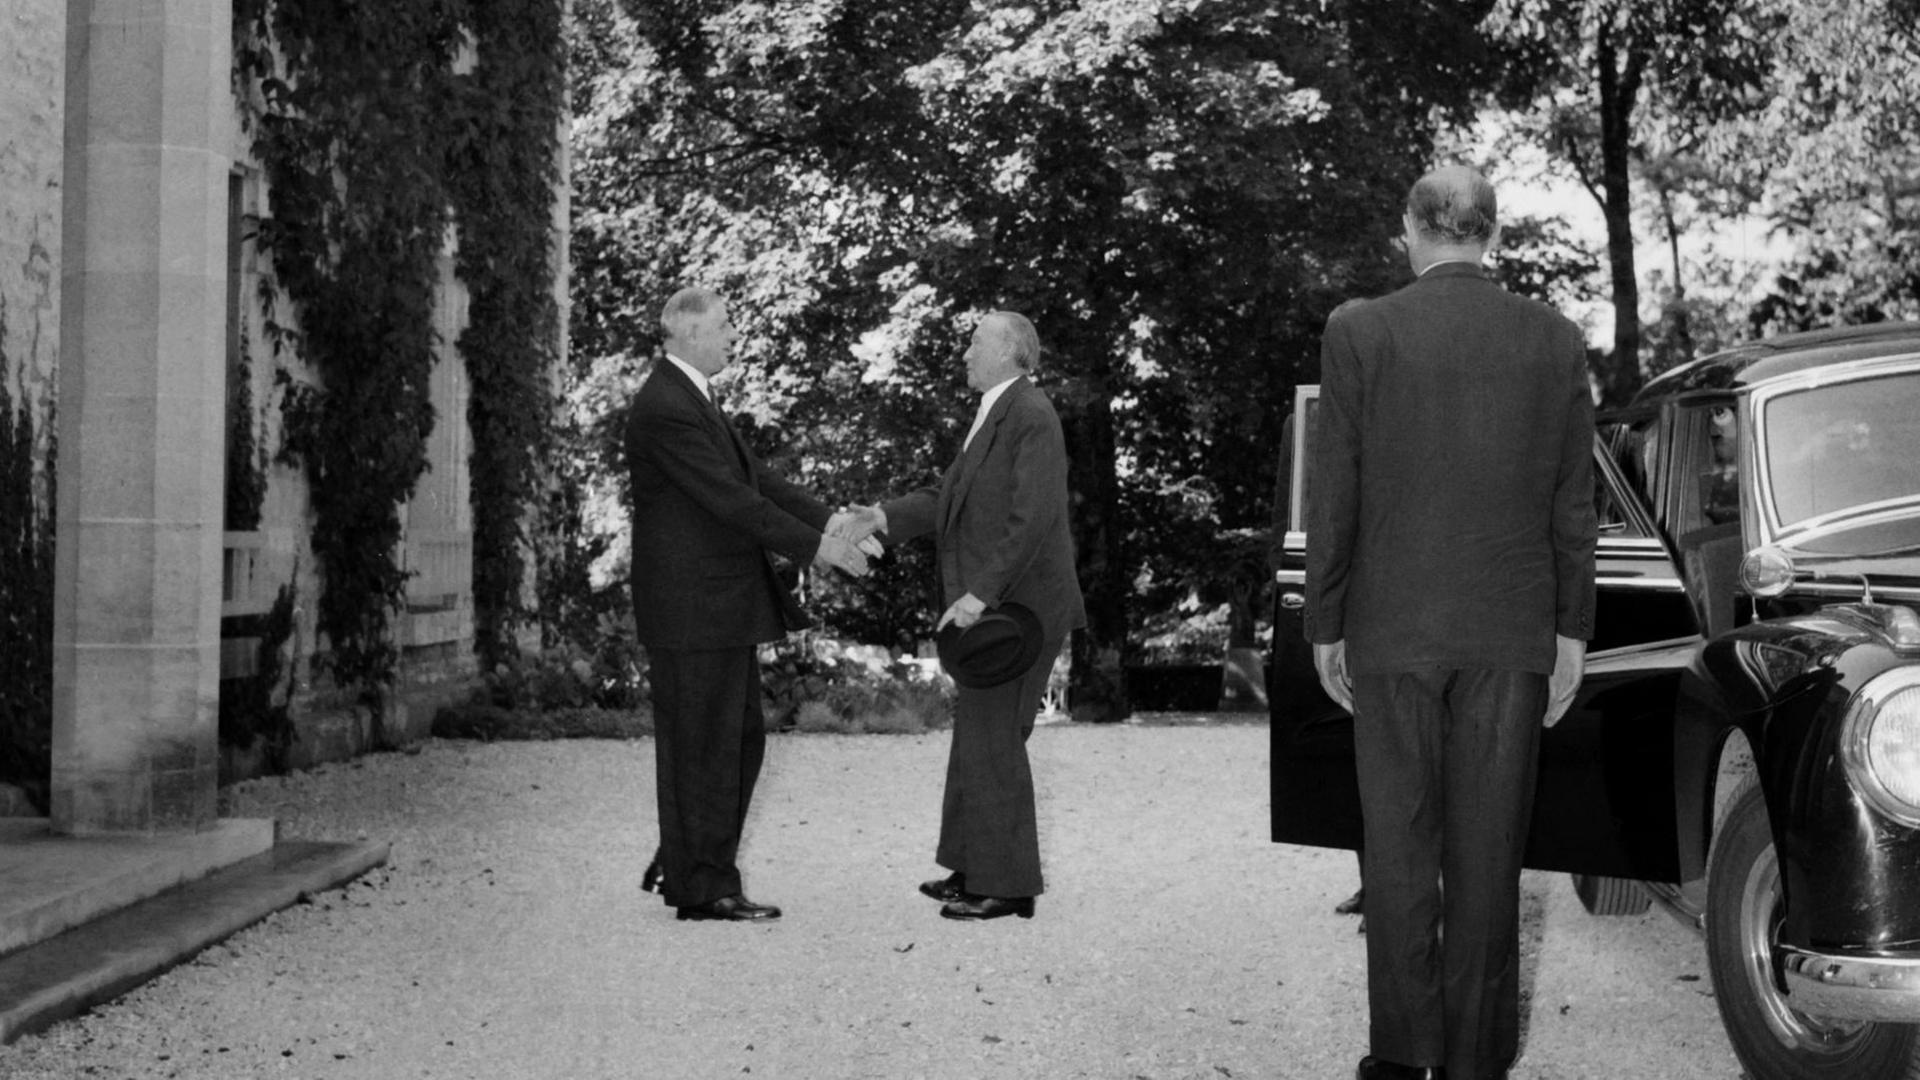 West German chancellor Konrad Adenauer (L) and French president Charles de Gaulle (C) shake hands in front of "la Boisserie", de Gaulle's home, in Colombey-les-Deux-Eglises on September 14, 1958 during their first meeting. AFP PHOTO / AFP PHOTO / INTERCONTINENTALE / -